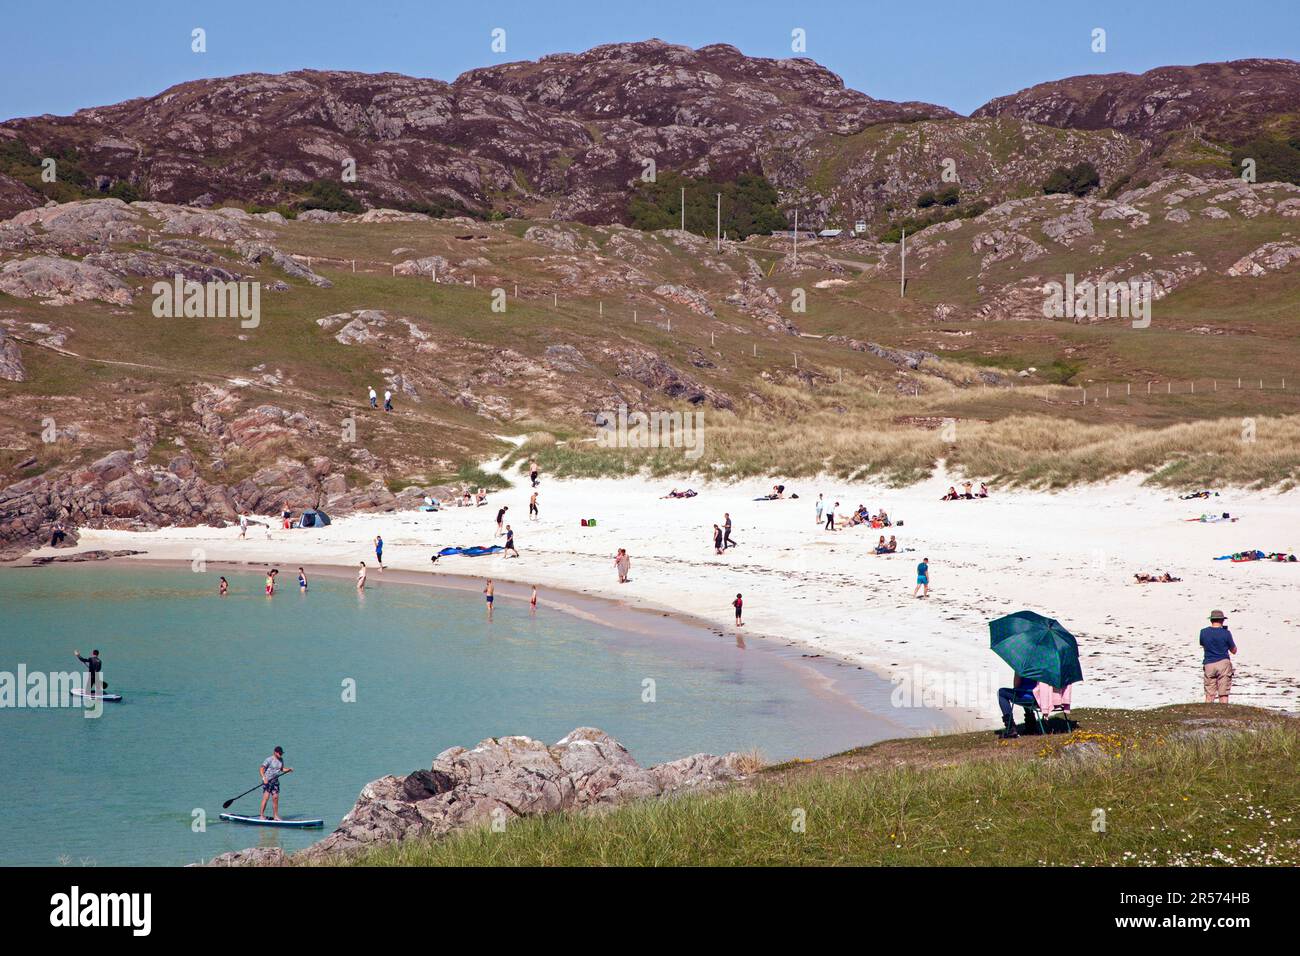 Achmelvich Bay, Assynt, Beach, North West Highlands, Scotland, UK. 1st June 2023. Sunny afternoon on the west coast of the Scottish Highlands temperature around 14 degrees centigrade. With scores of people out on the silver sand to take in the view of the award winning beach and watersports on The Minch. Stock Photo